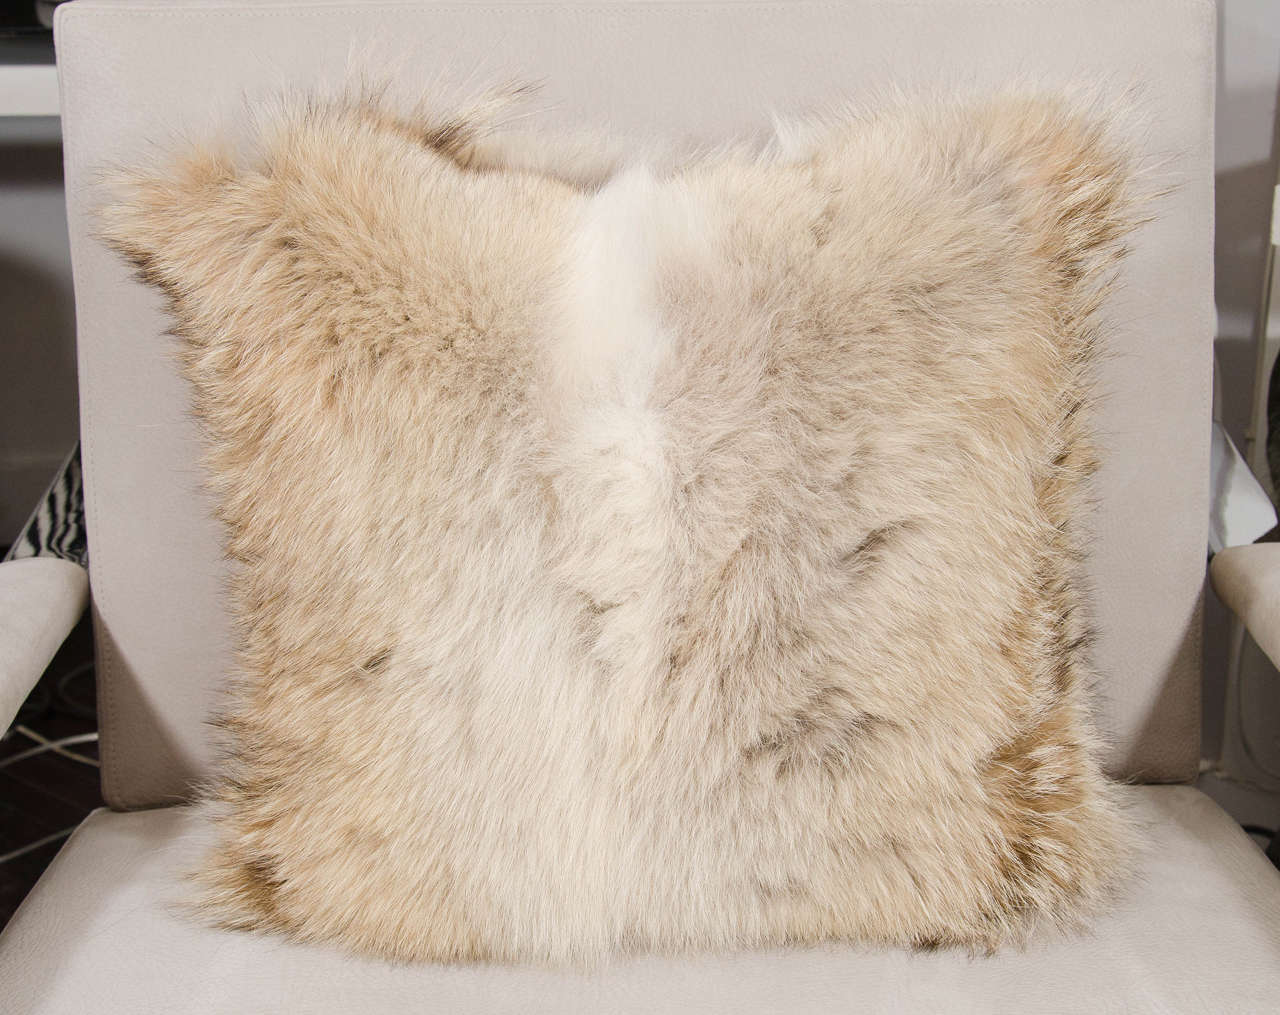 Double-sided coyote pillow.